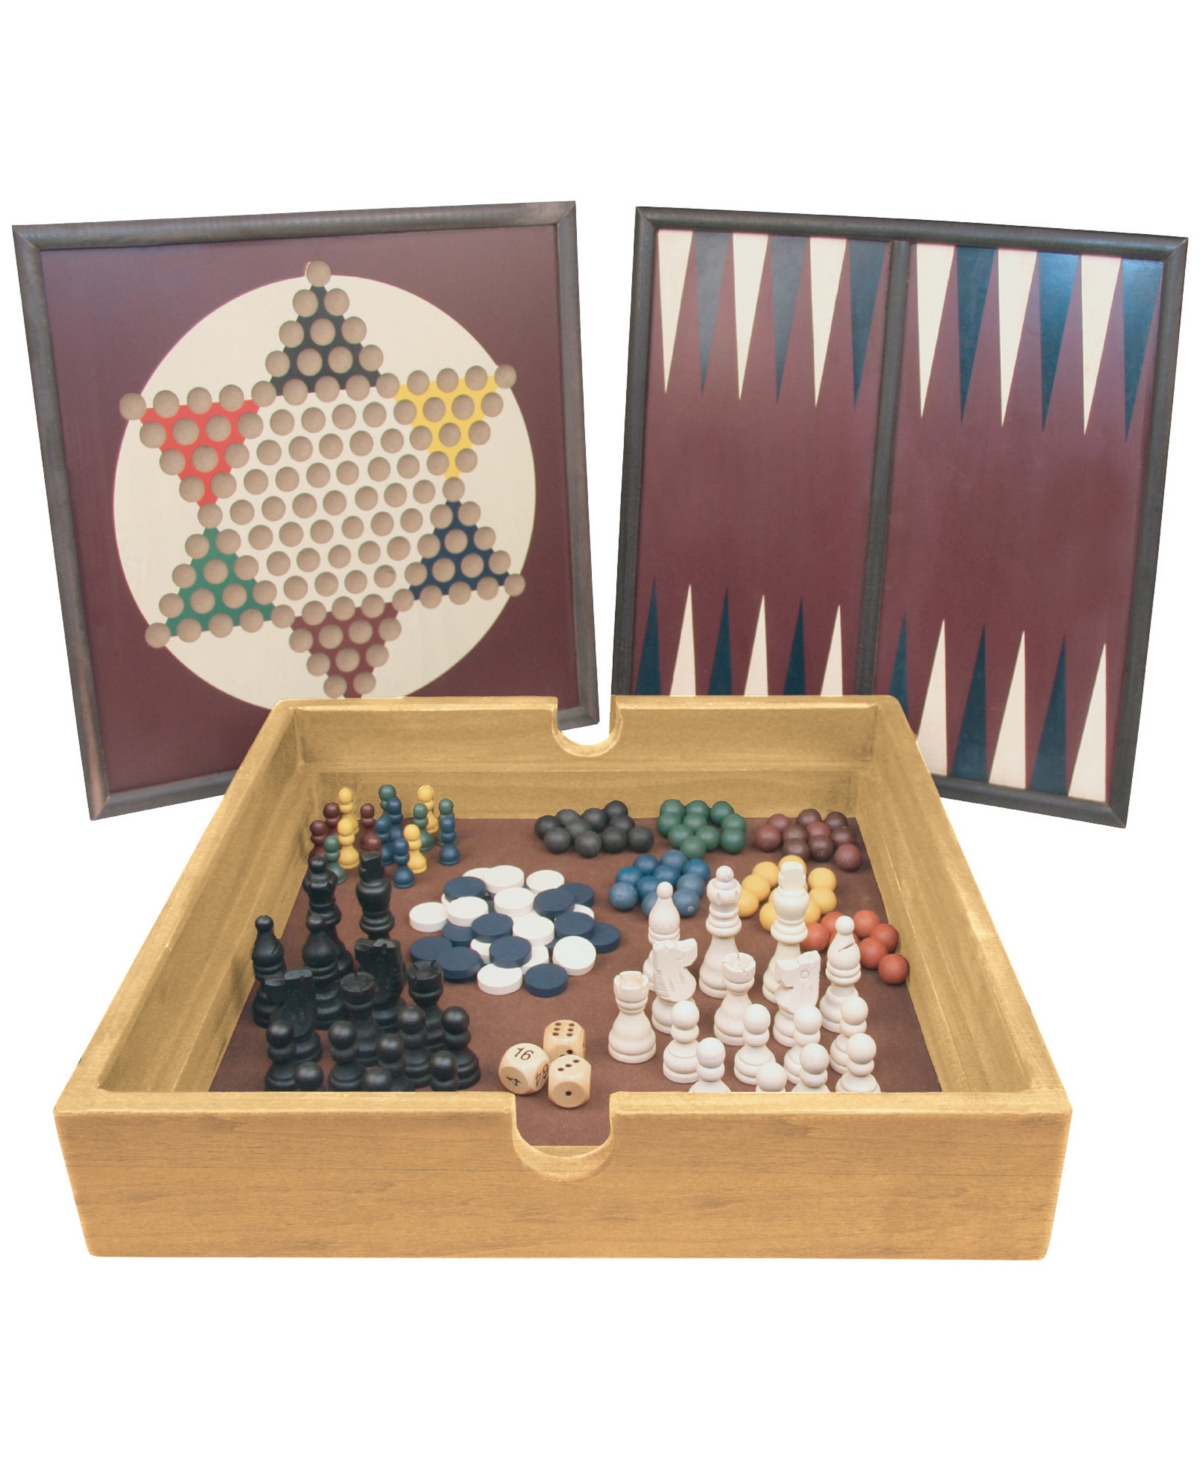 Areyougame Kids' 5-in-1 Wood Game Set In No Color